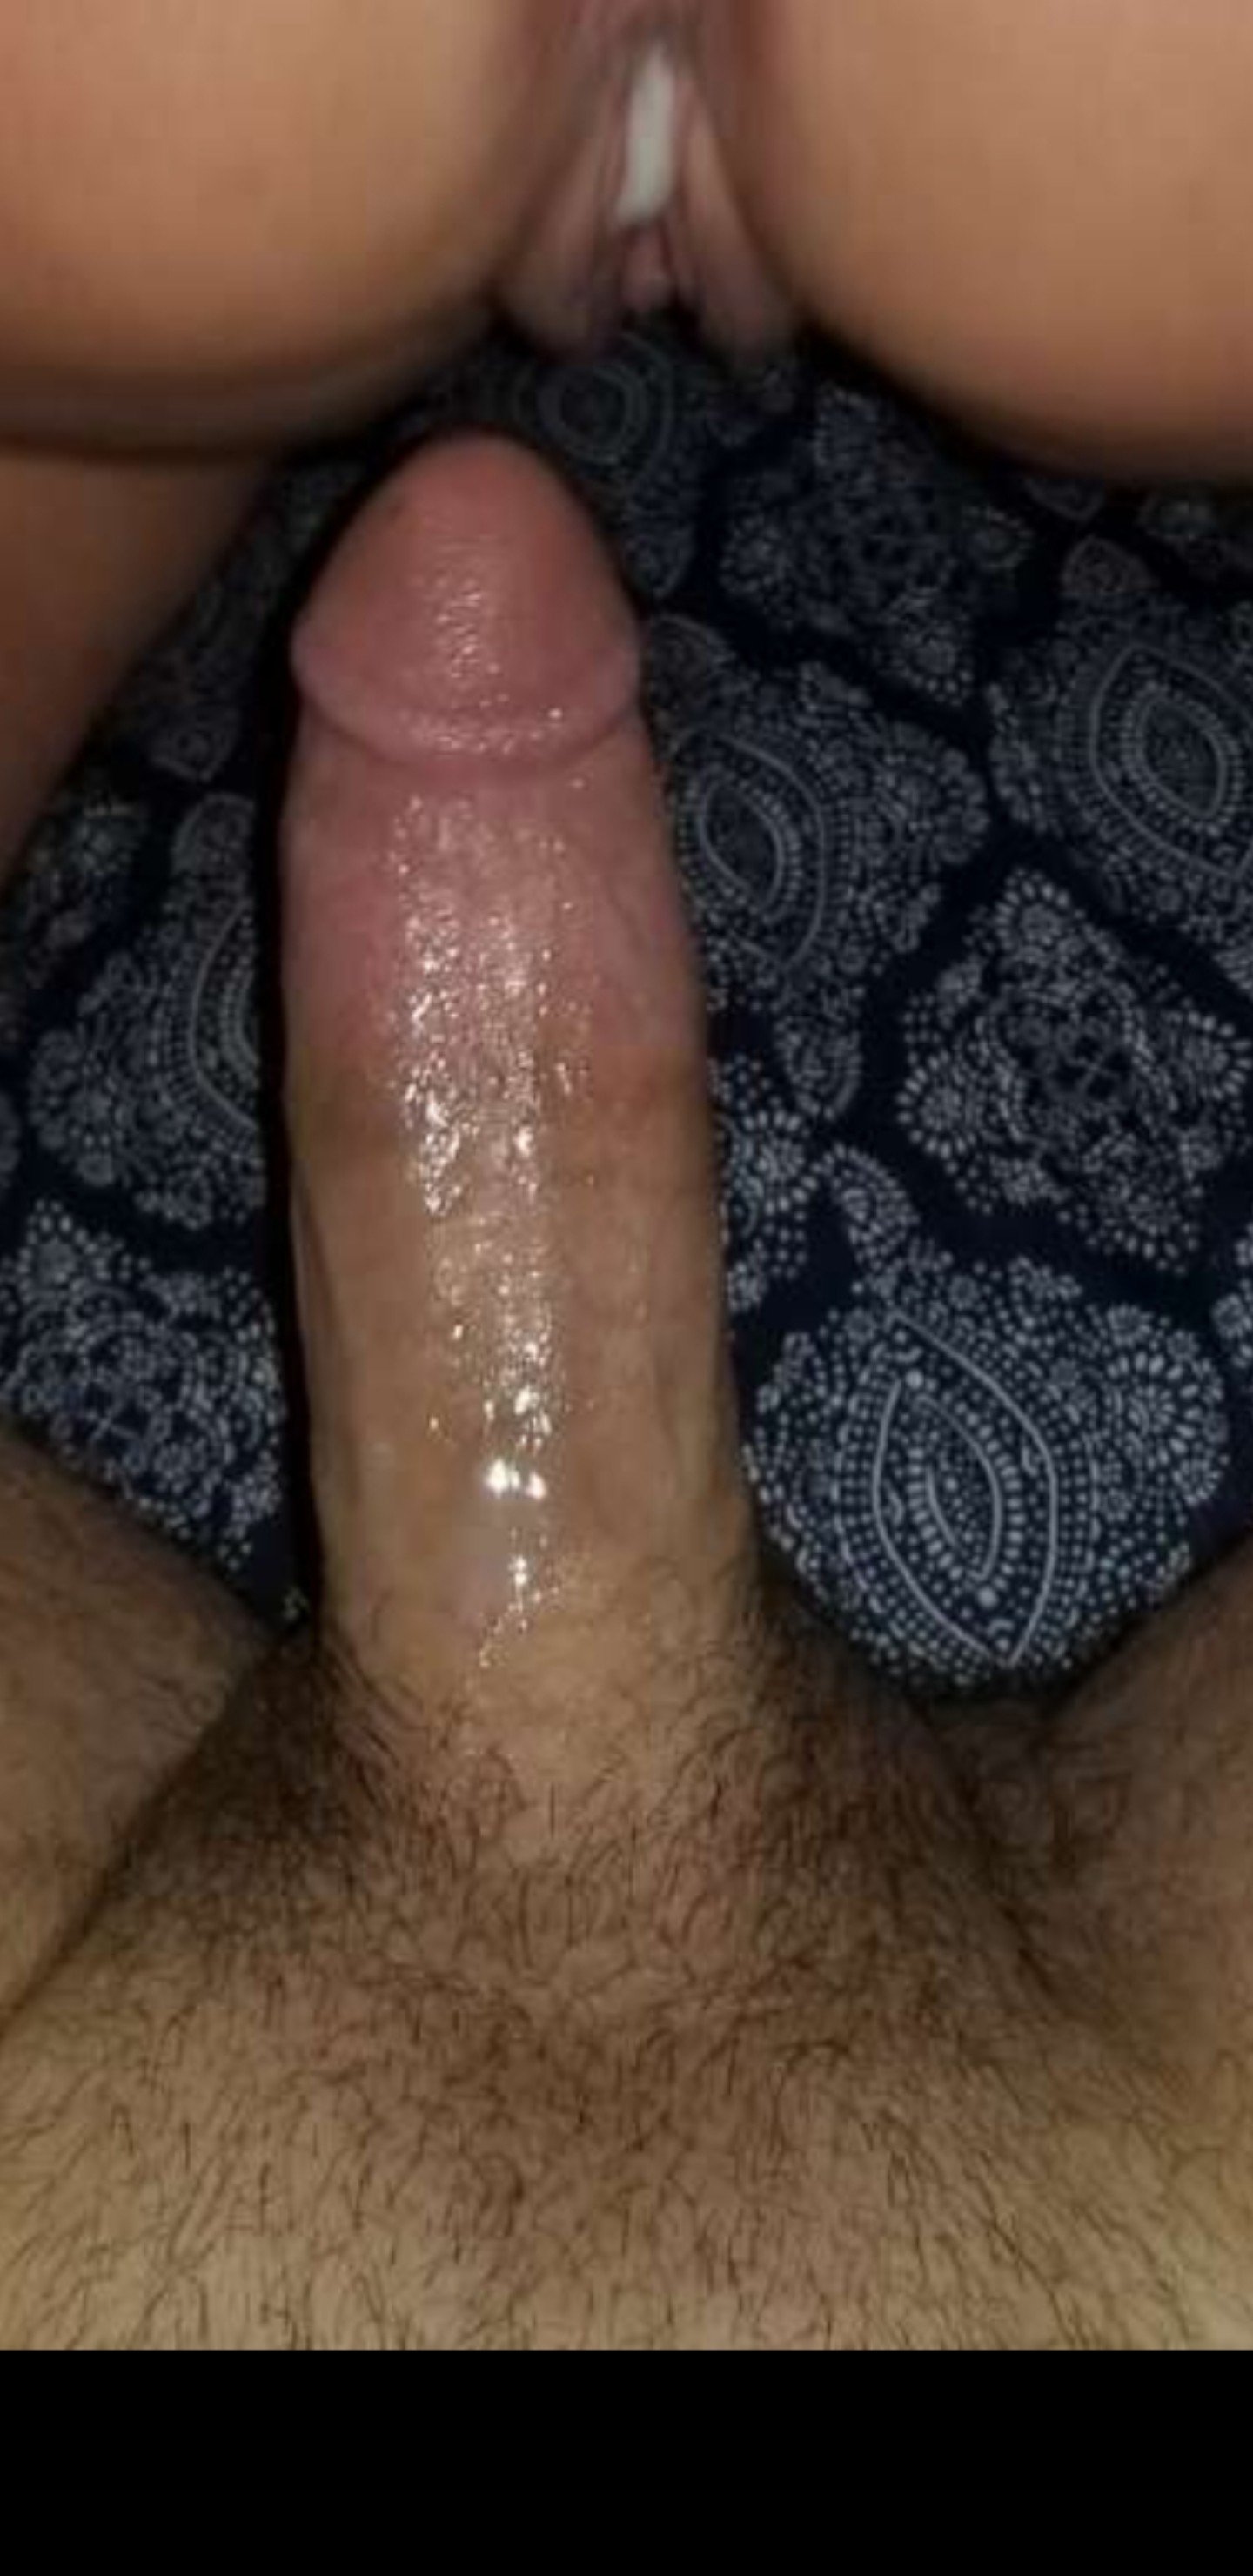 Explore the Post by SeenBean with the username @SeenBean, posted on November 25, 2020. The post is about the topic Creampie. and the text says 'filling her sexy pussy up with cum and watching it drip out 😈 she always make sure she gets a taste of my cock covered in cum and pussy juice at the end'